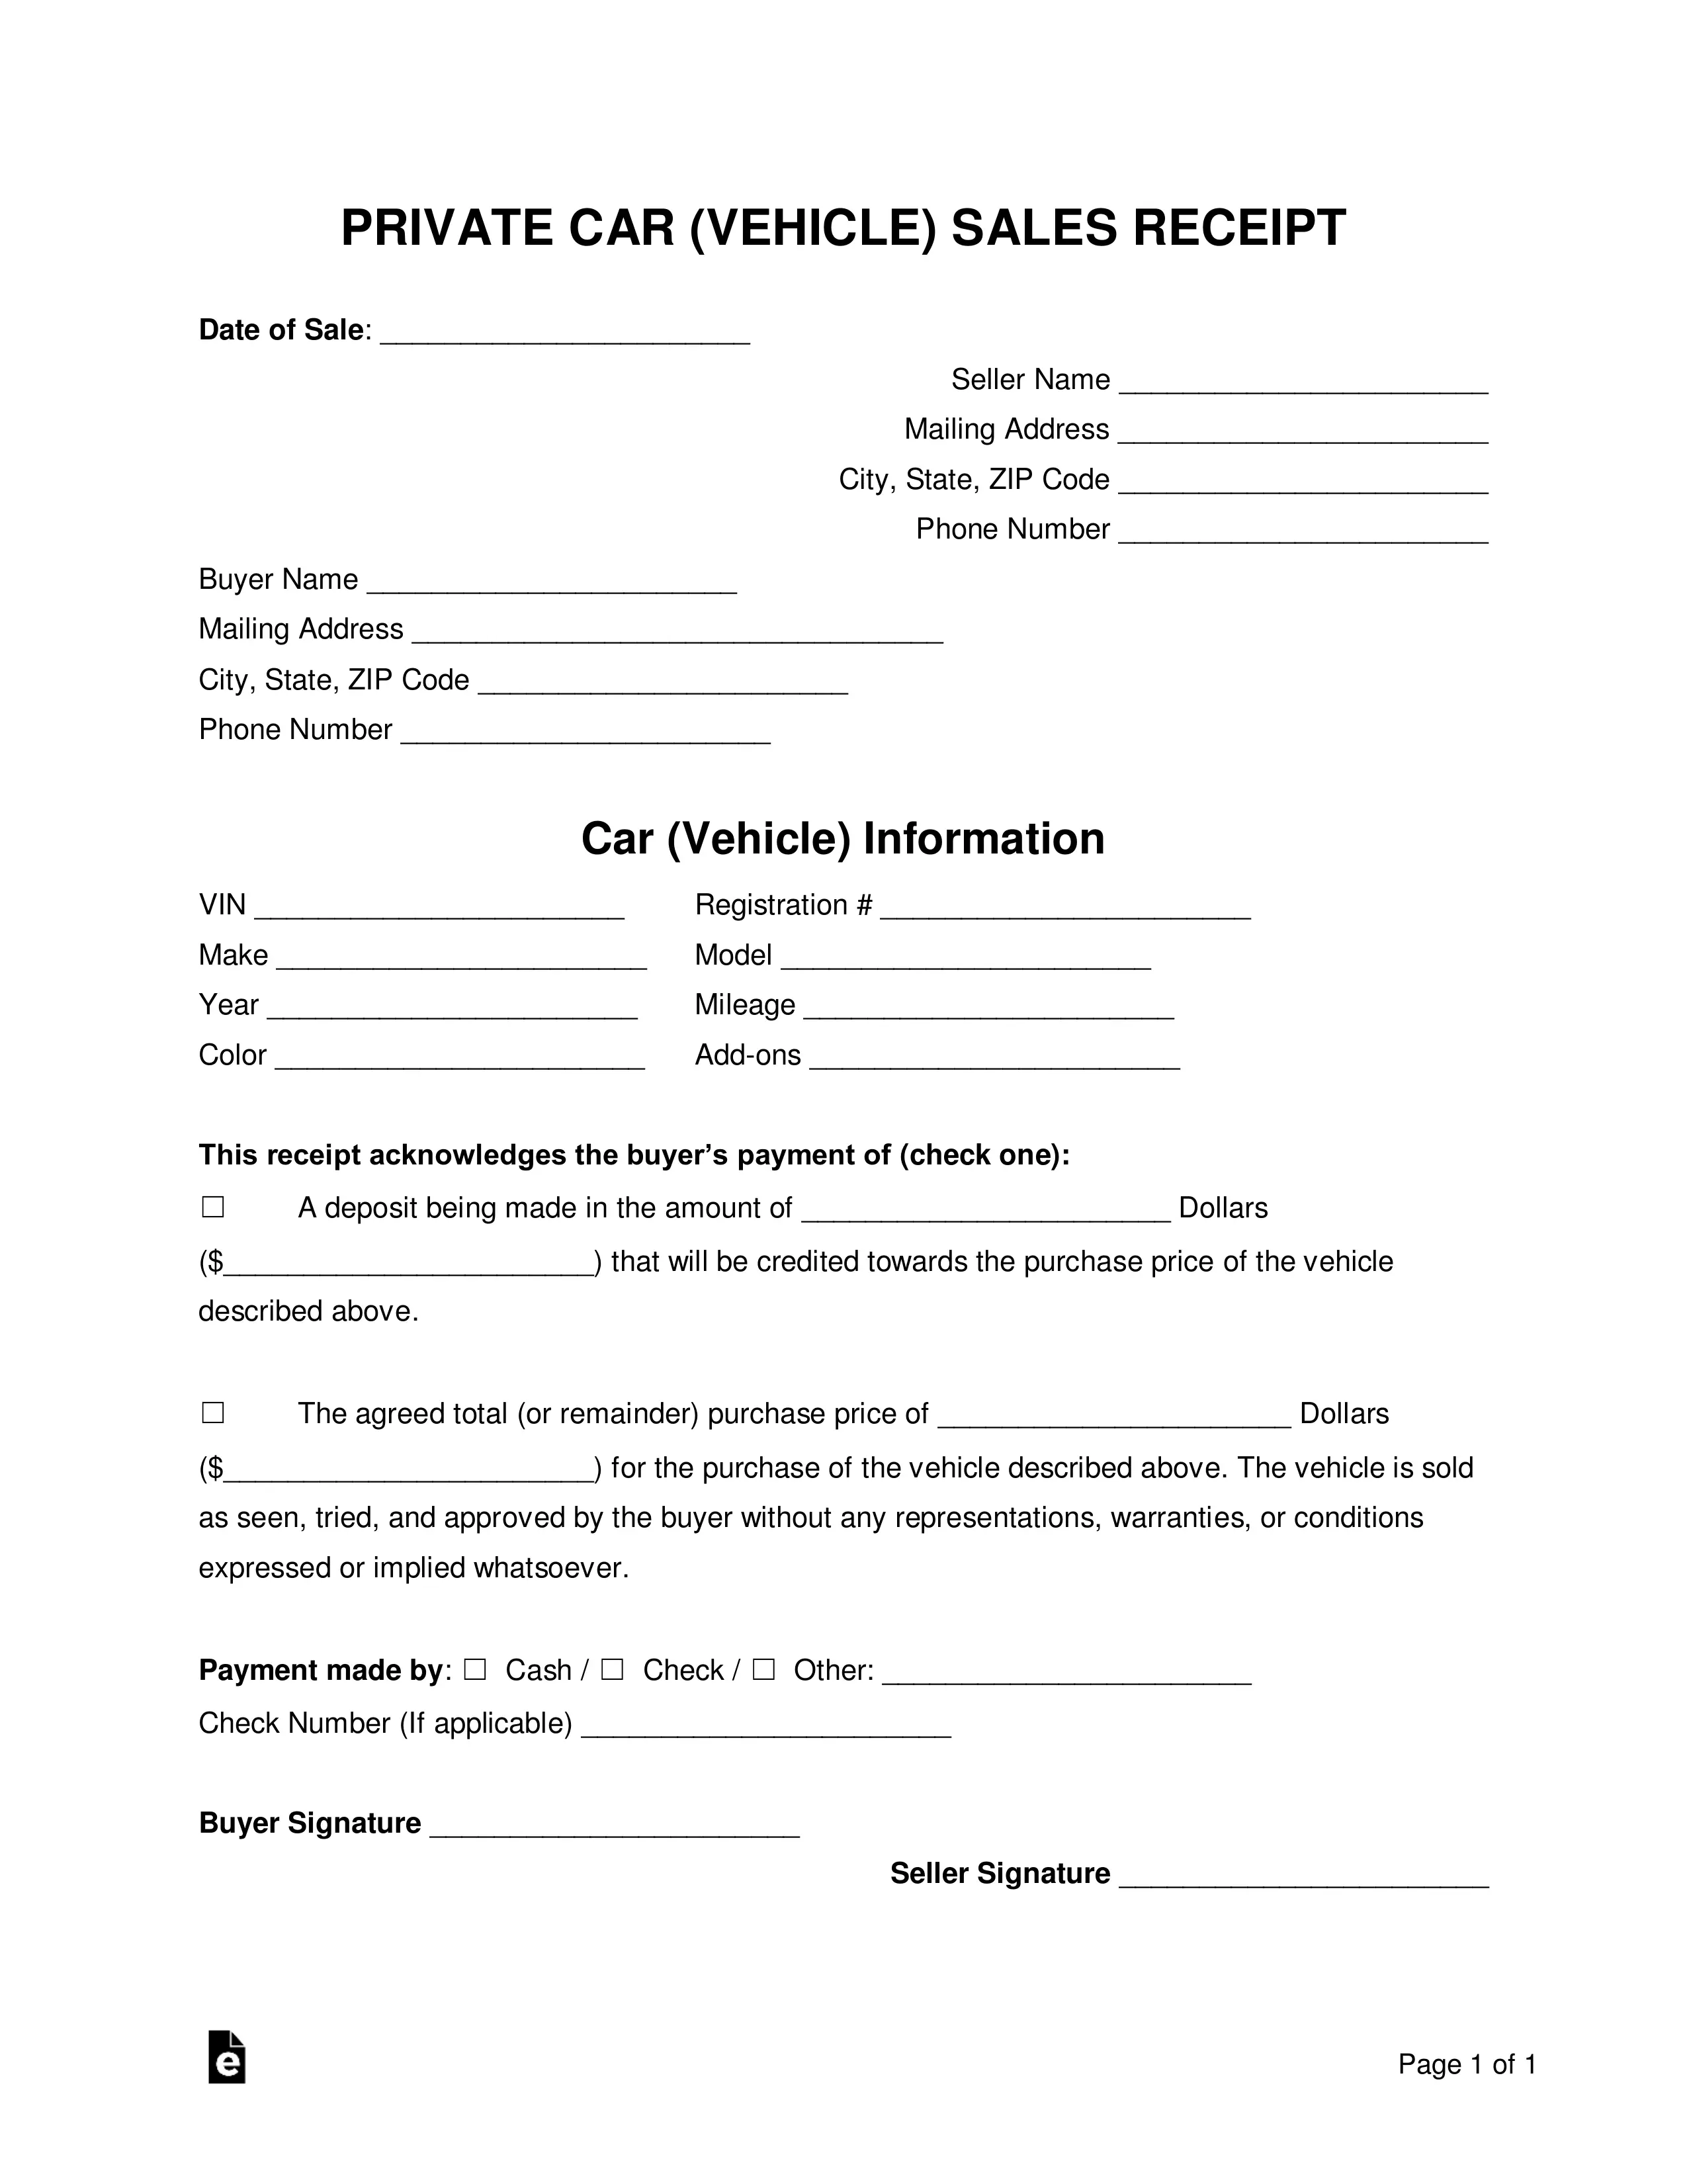 Free Vehicle (Private Sale) Receipt Template